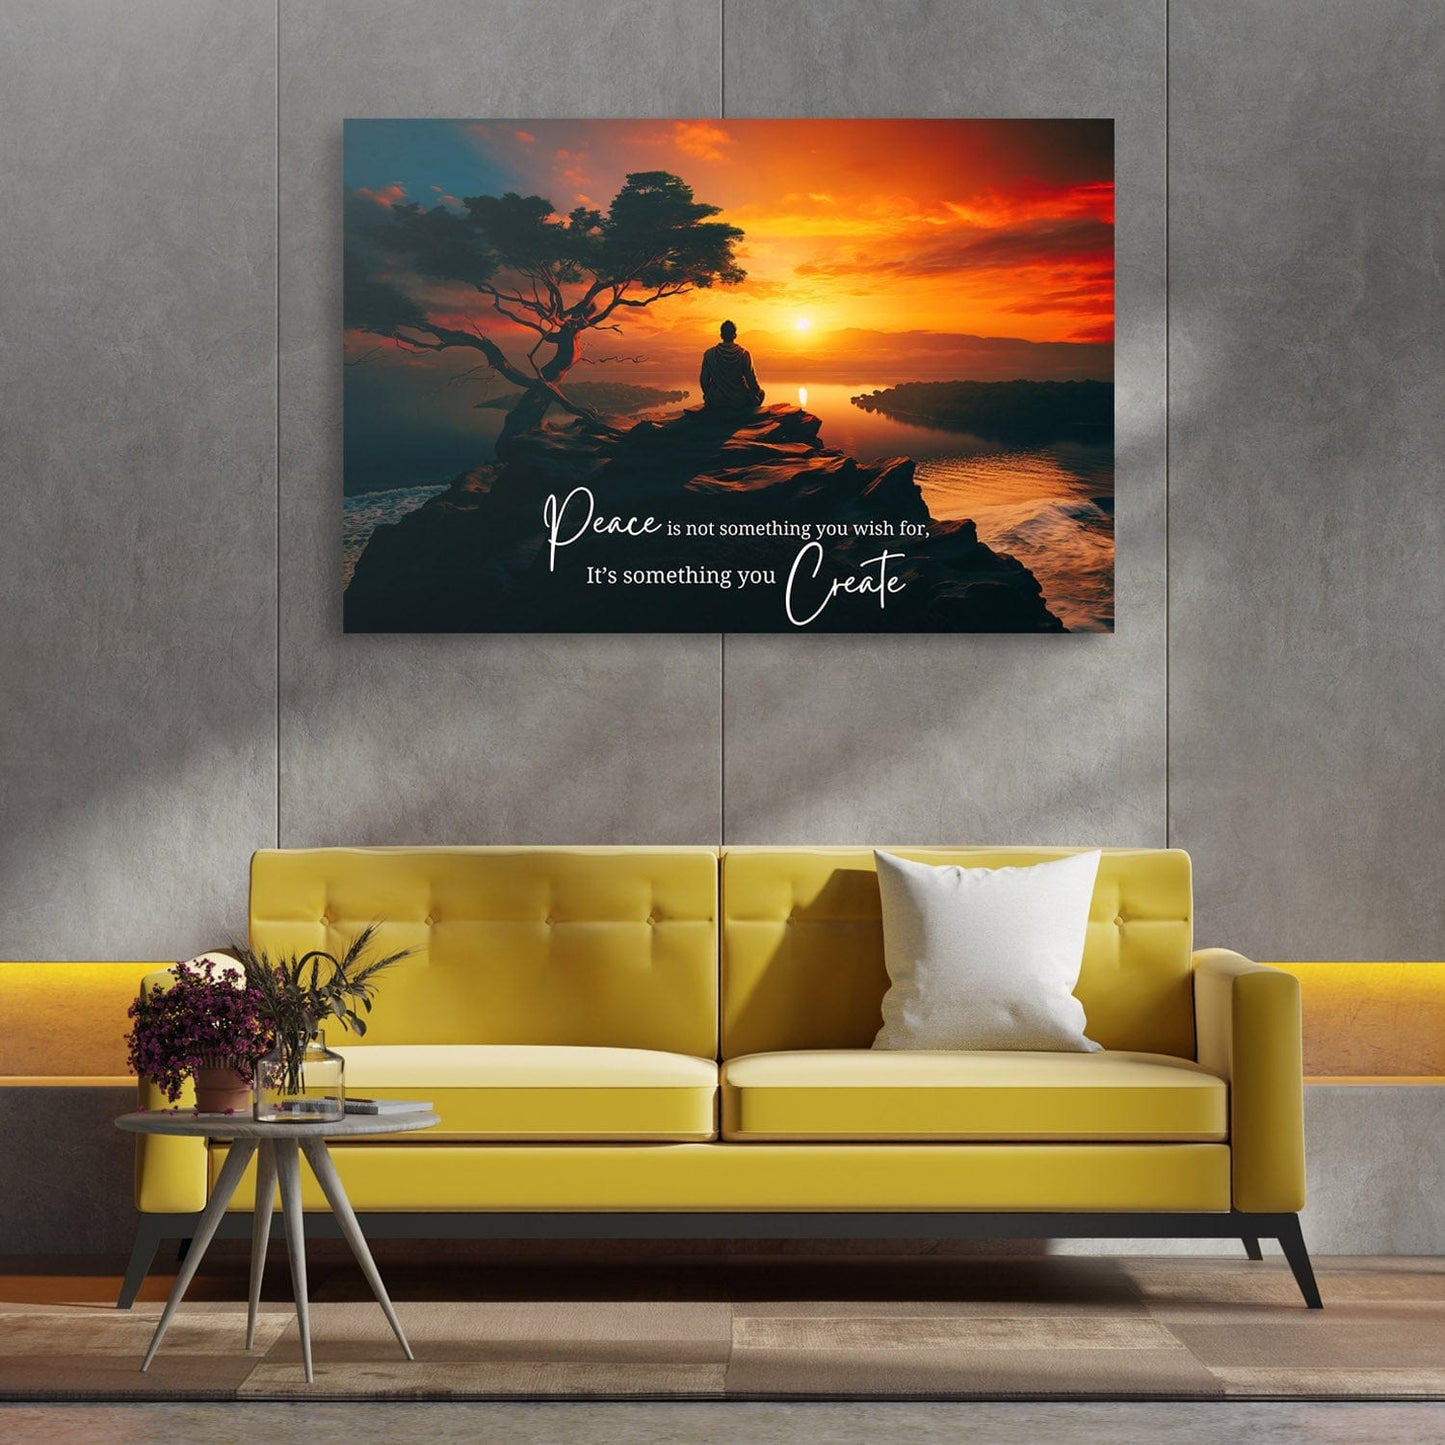 Peace is not something you wish for, it’s something you create. - Thich Nhat Hanh Quote Wall Art | Inspirational Wall Art Motivational Wall Art Quotes Office Art | ImpaktMaker Exclusive Canvas Art Landscape